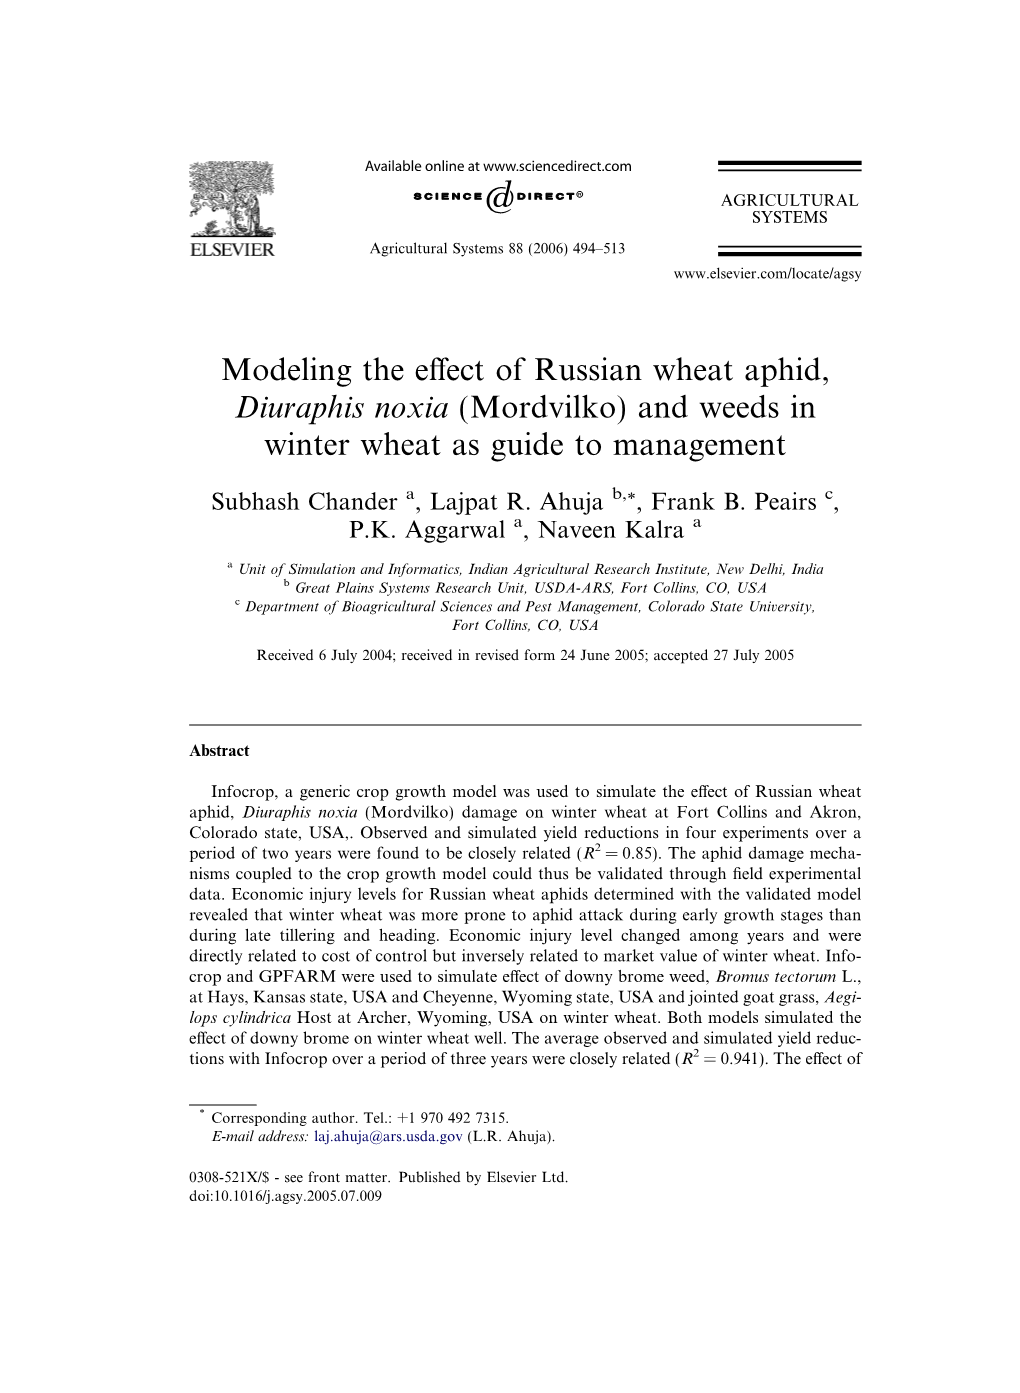 Modeling the Effect of Russian Wheat Aphid, Diuraphis Noxia (Mordvilko) and Weeds in Winter Wheat As Guide to Management